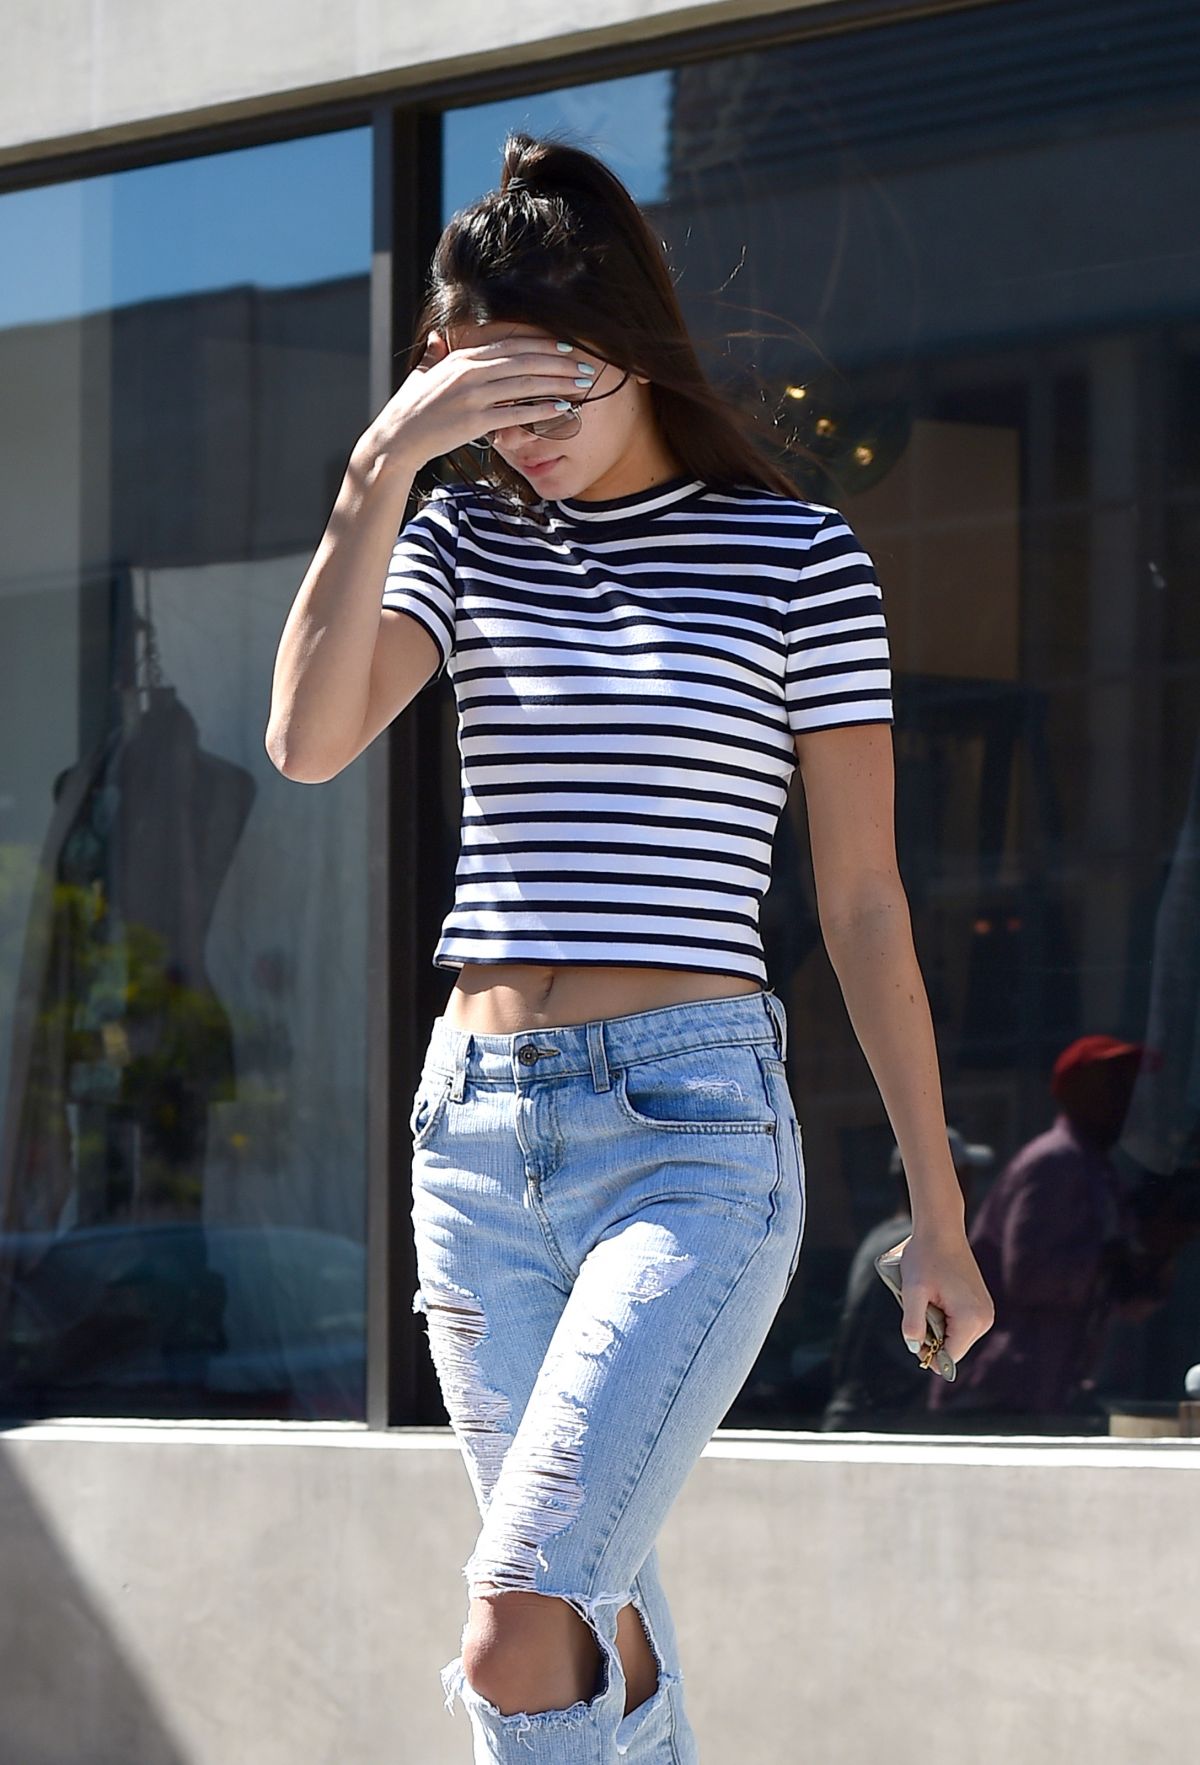 KENDALL JENNER in Ripped Jeans Out in West Hollywood - HawtCelebs1200 x 1765